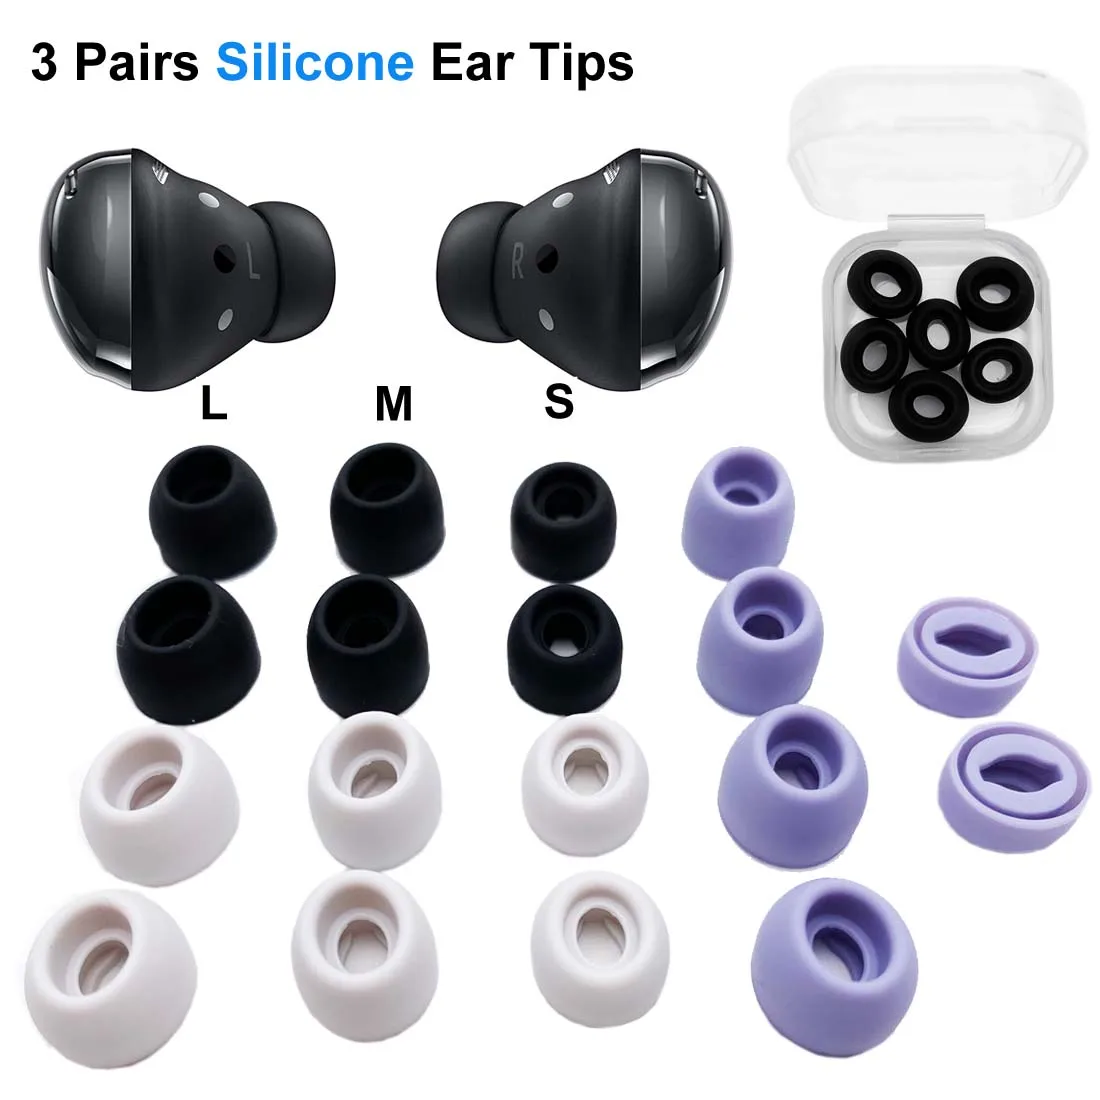 3Pairs Silicone Ear Tips for Samsung Galaxy buds 2 pro Earphone Eartips Earbuds Tips Case Accessory for Galaxy buds 2Pro